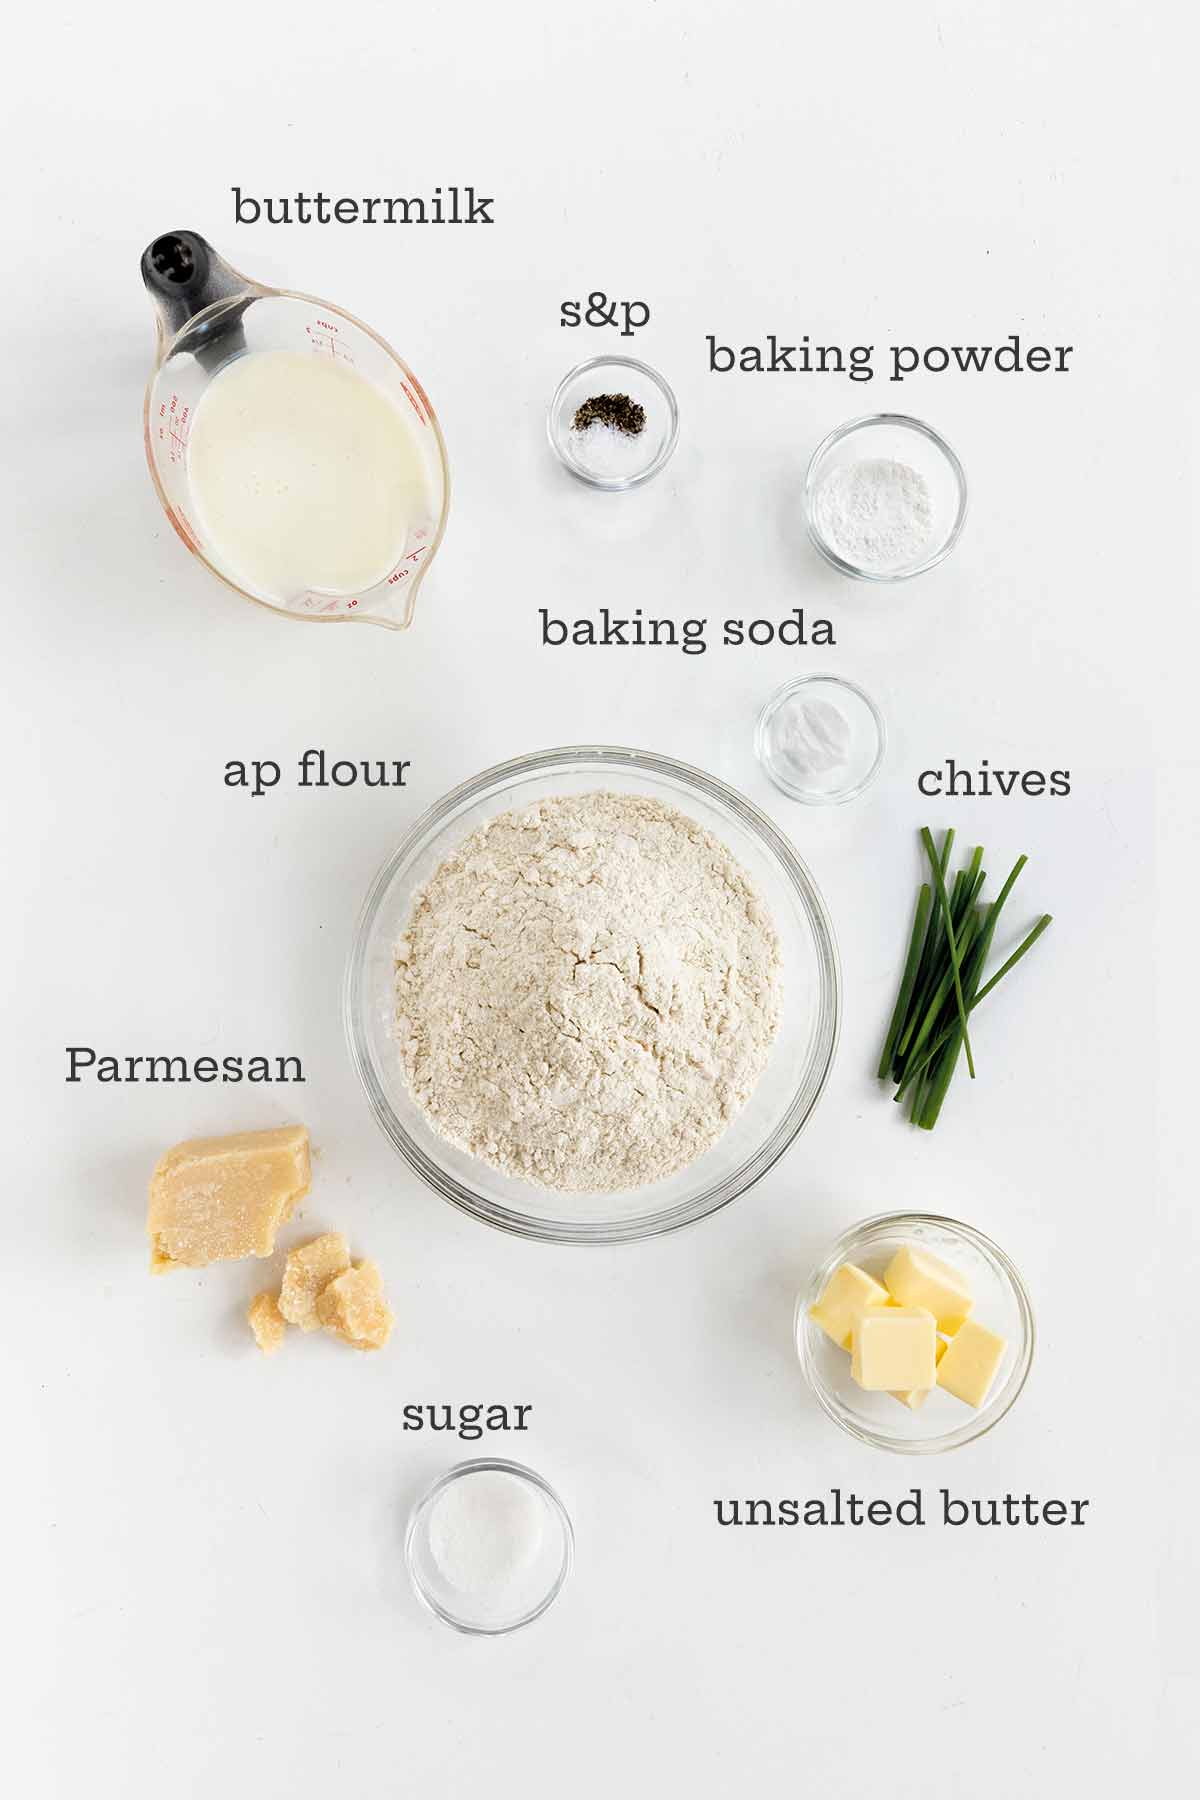 Ingredients for Parmesan cheese biscuits -- flour, buttermilk, baking powder, chives, butter, sugar, and cheese.